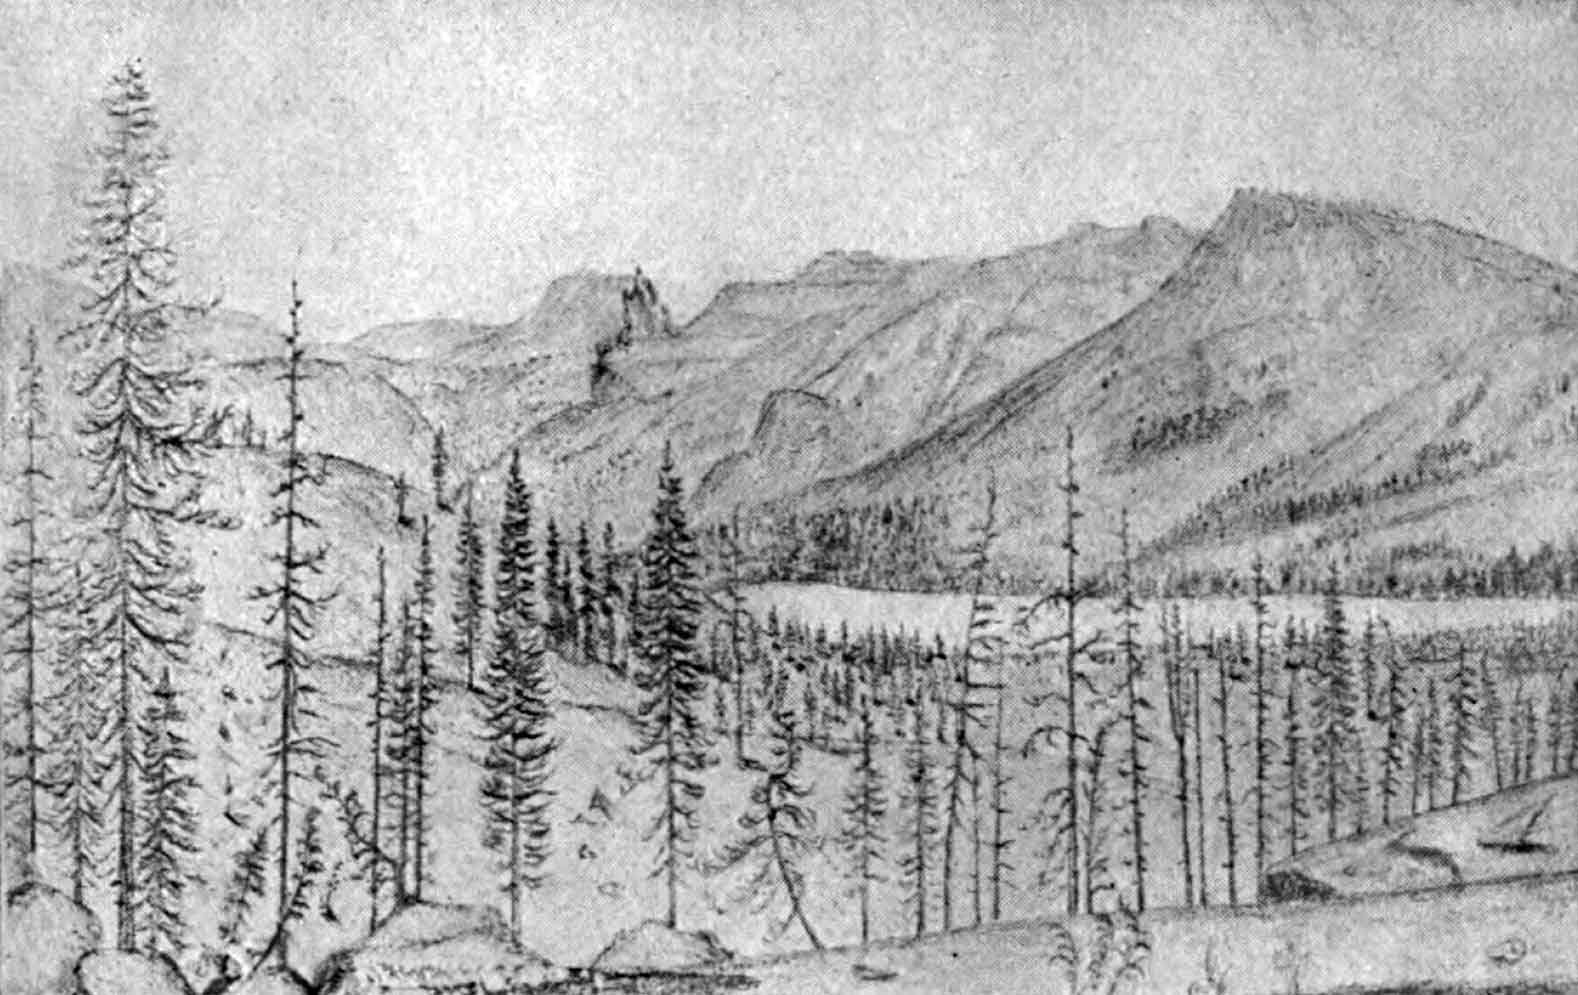 A sketch of a mountain landscape with a few tall evergreen trees and a narrow lake in the foreground and a sprawling mountain range the distance.